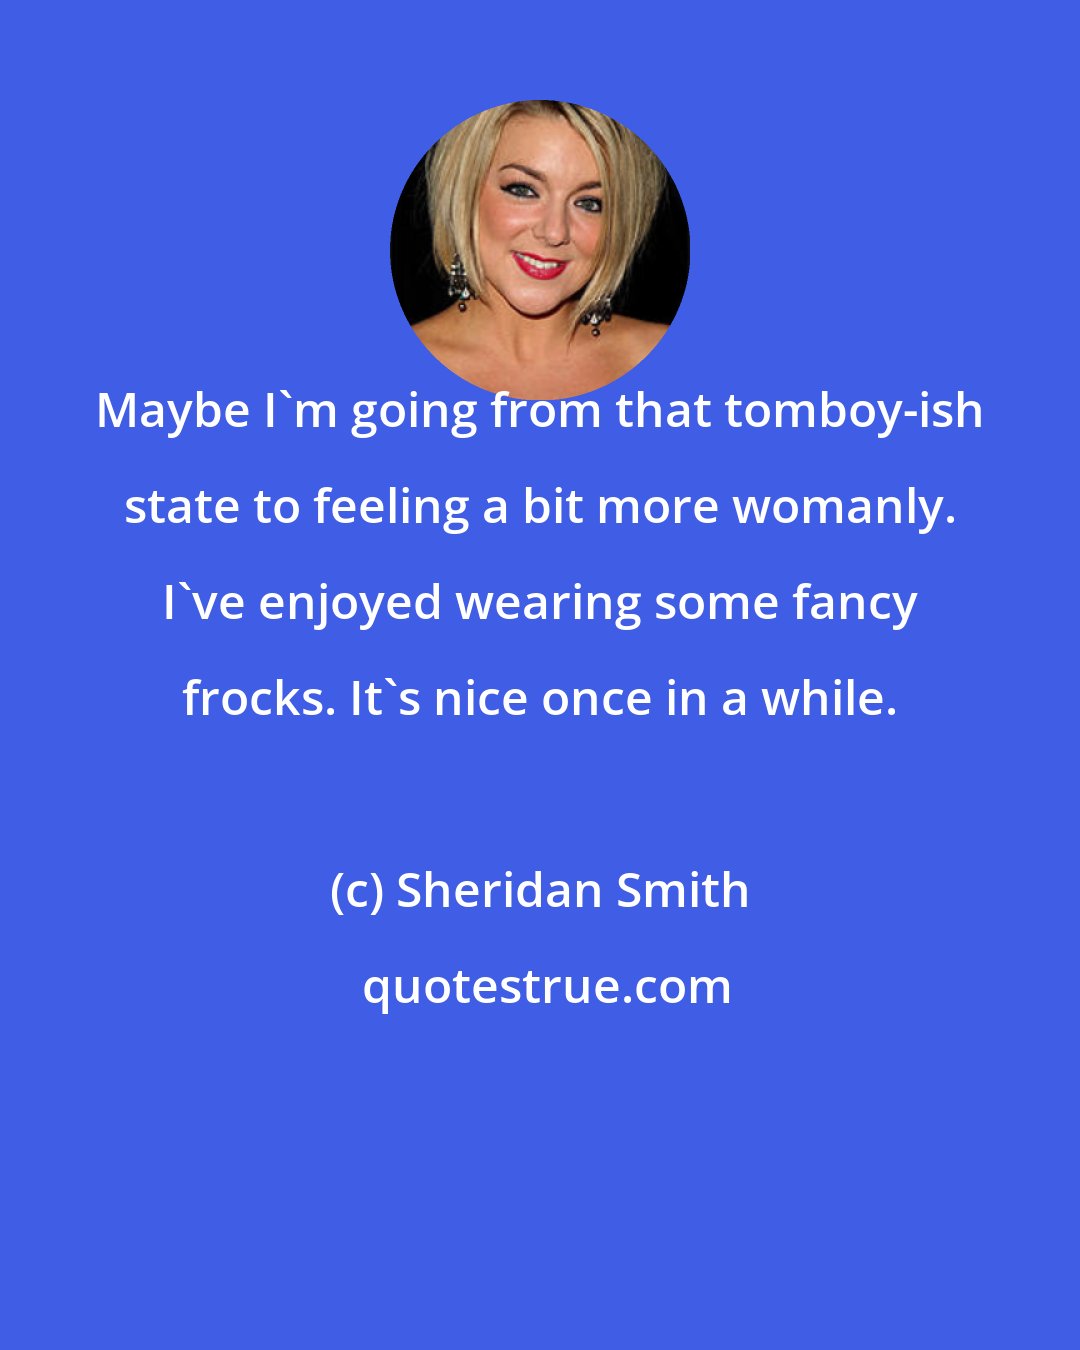 Sheridan Smith: Maybe I'm going from that tomboy-ish state to feeling a bit more womanly. I've enjoyed wearing some fancy frocks. It's nice once in a while.